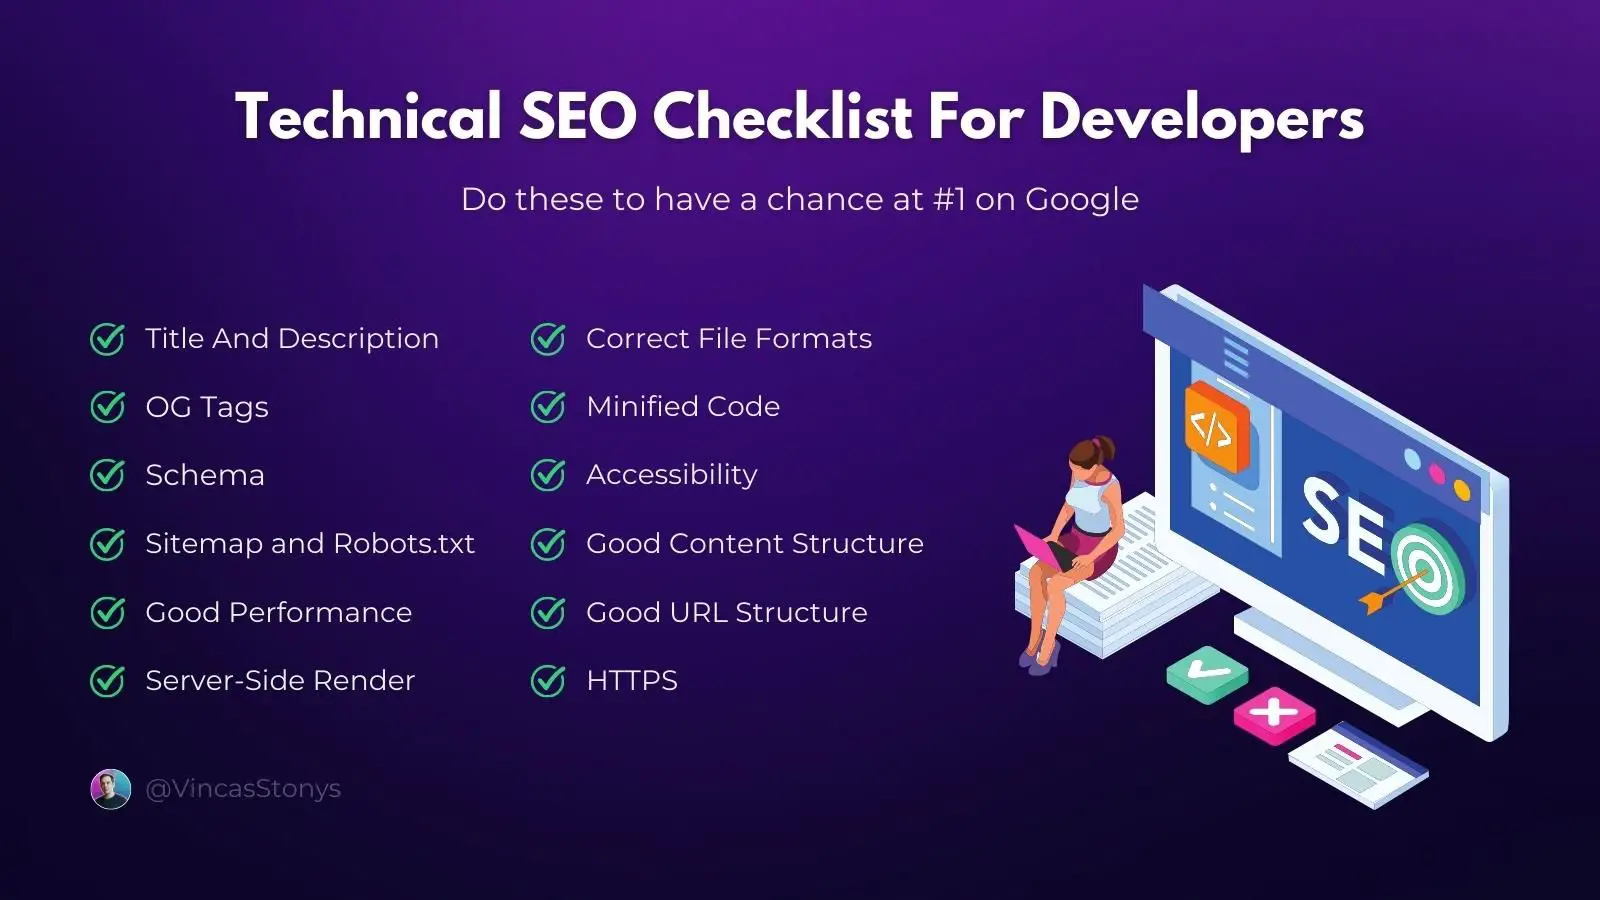 12-step Technical SEO checklist for developers.